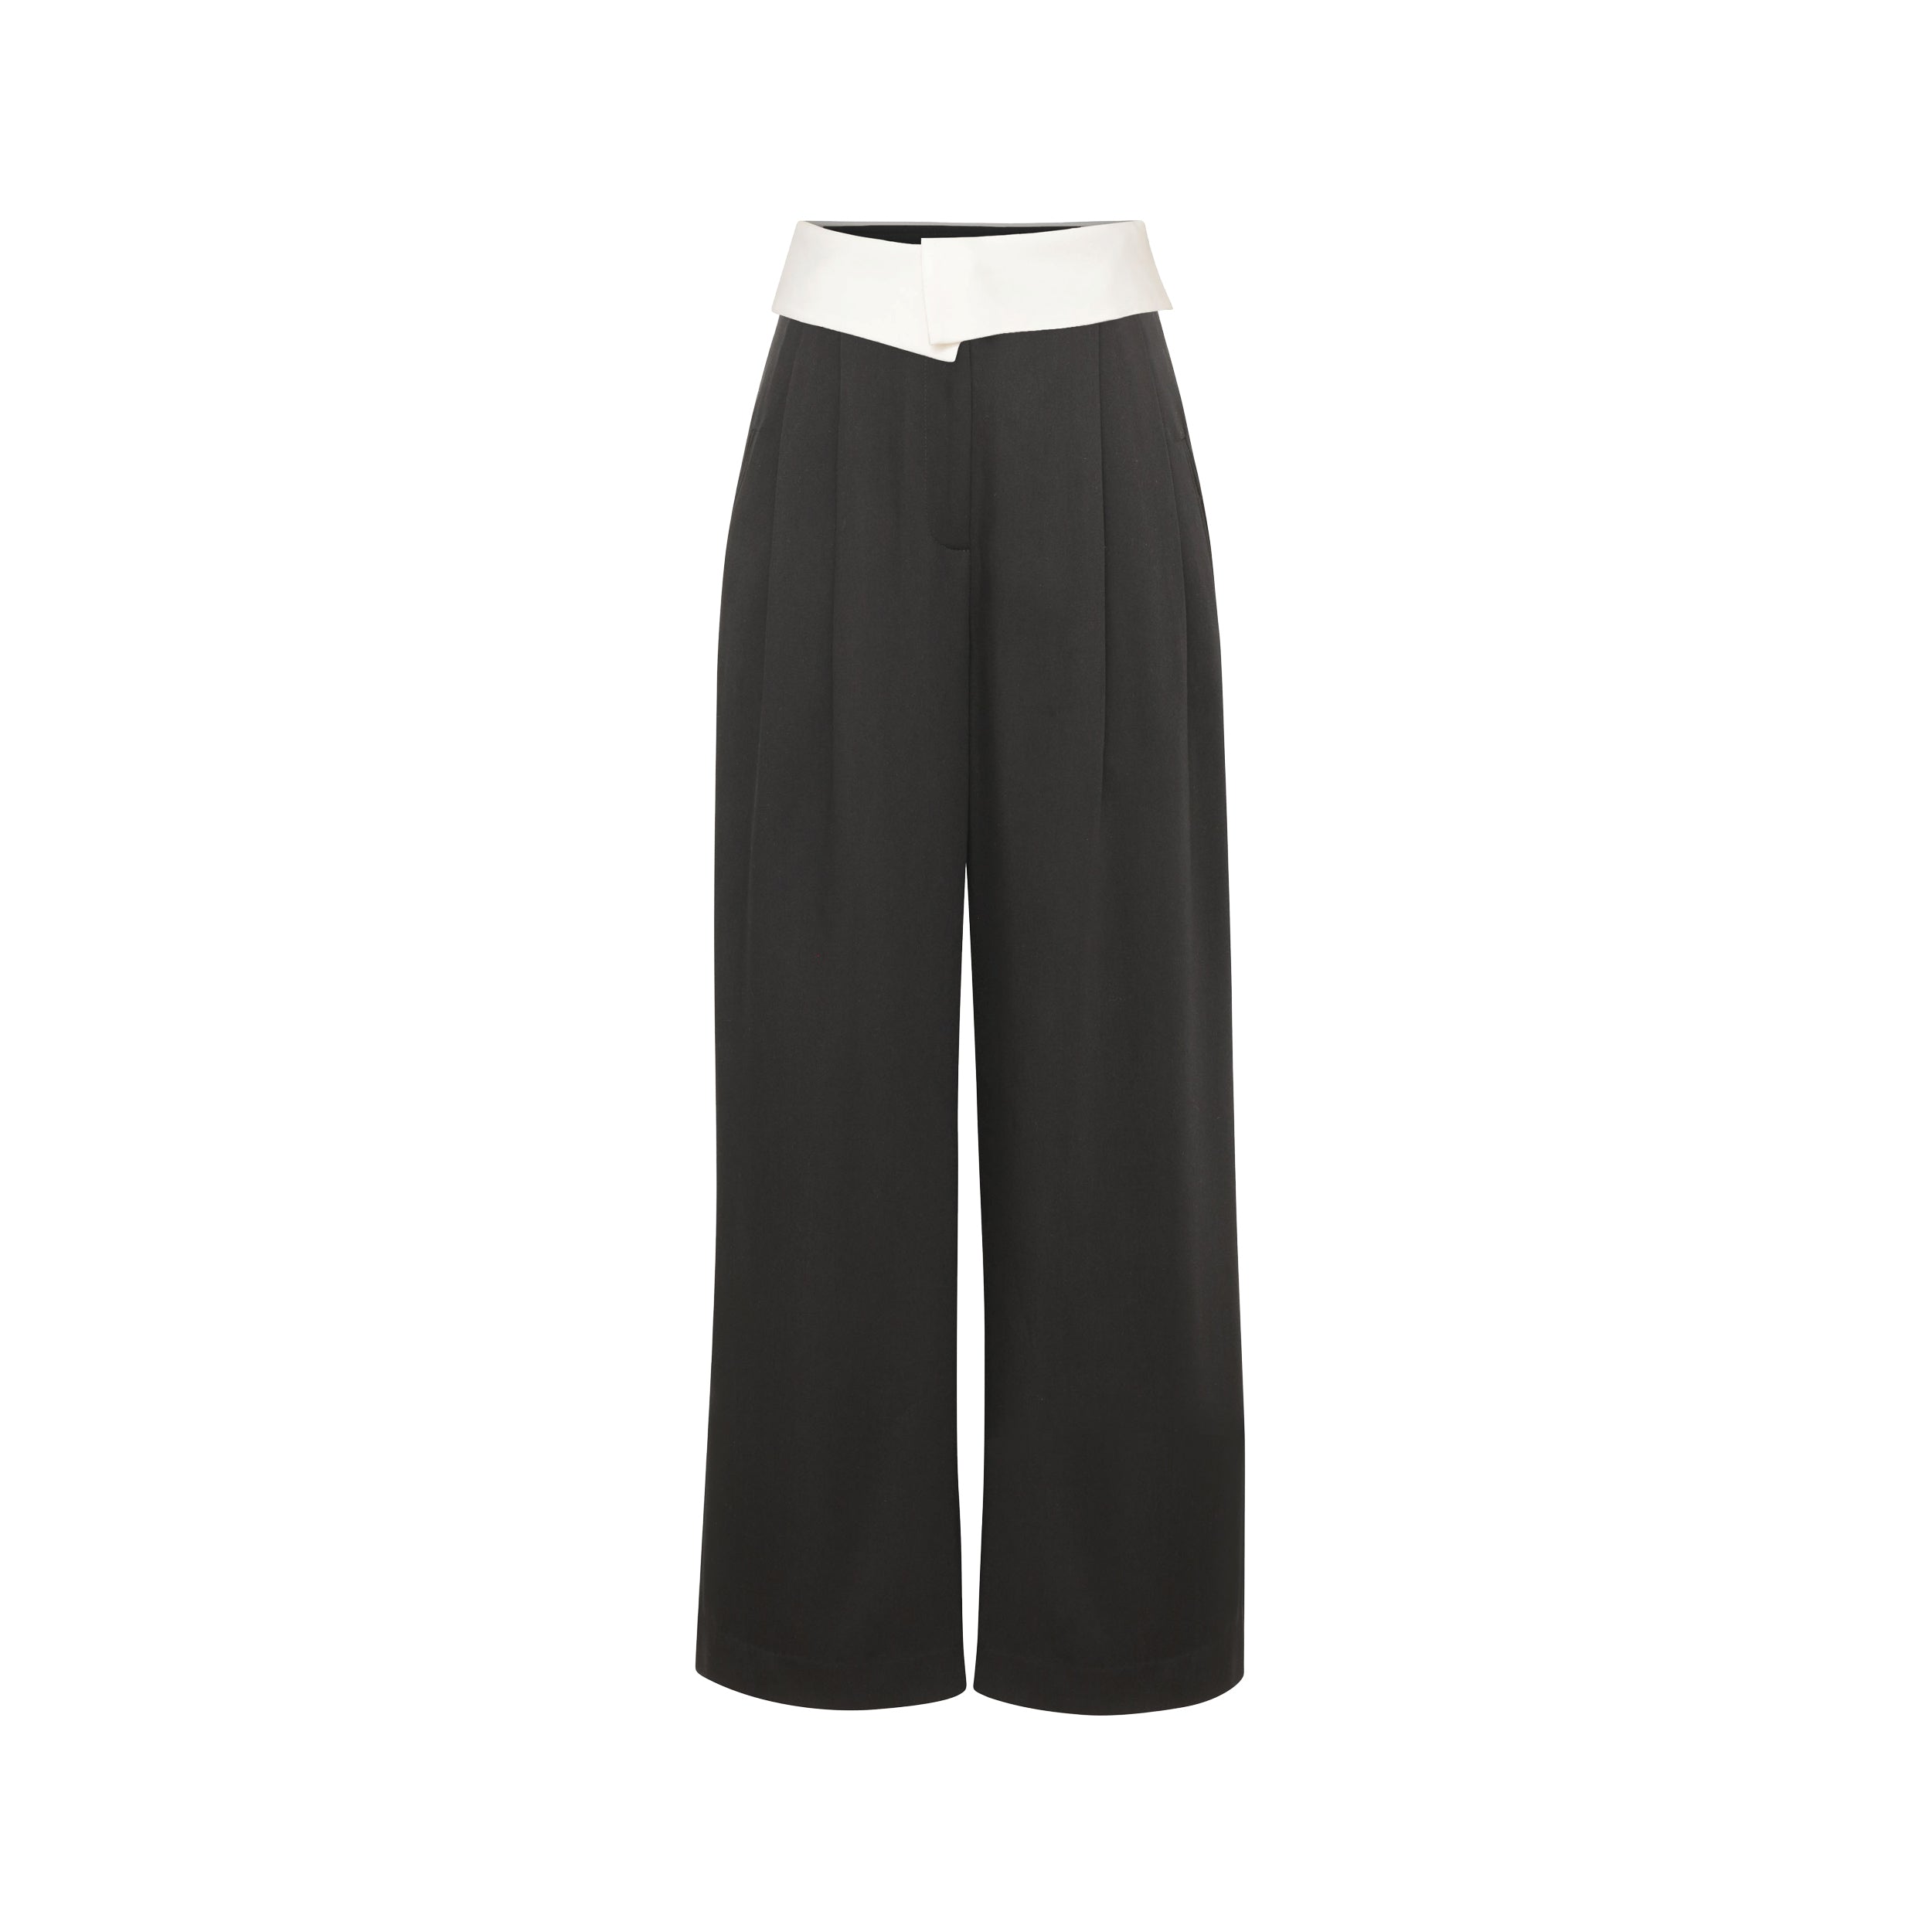 Product view of black trousers with white foldover waistband detail.